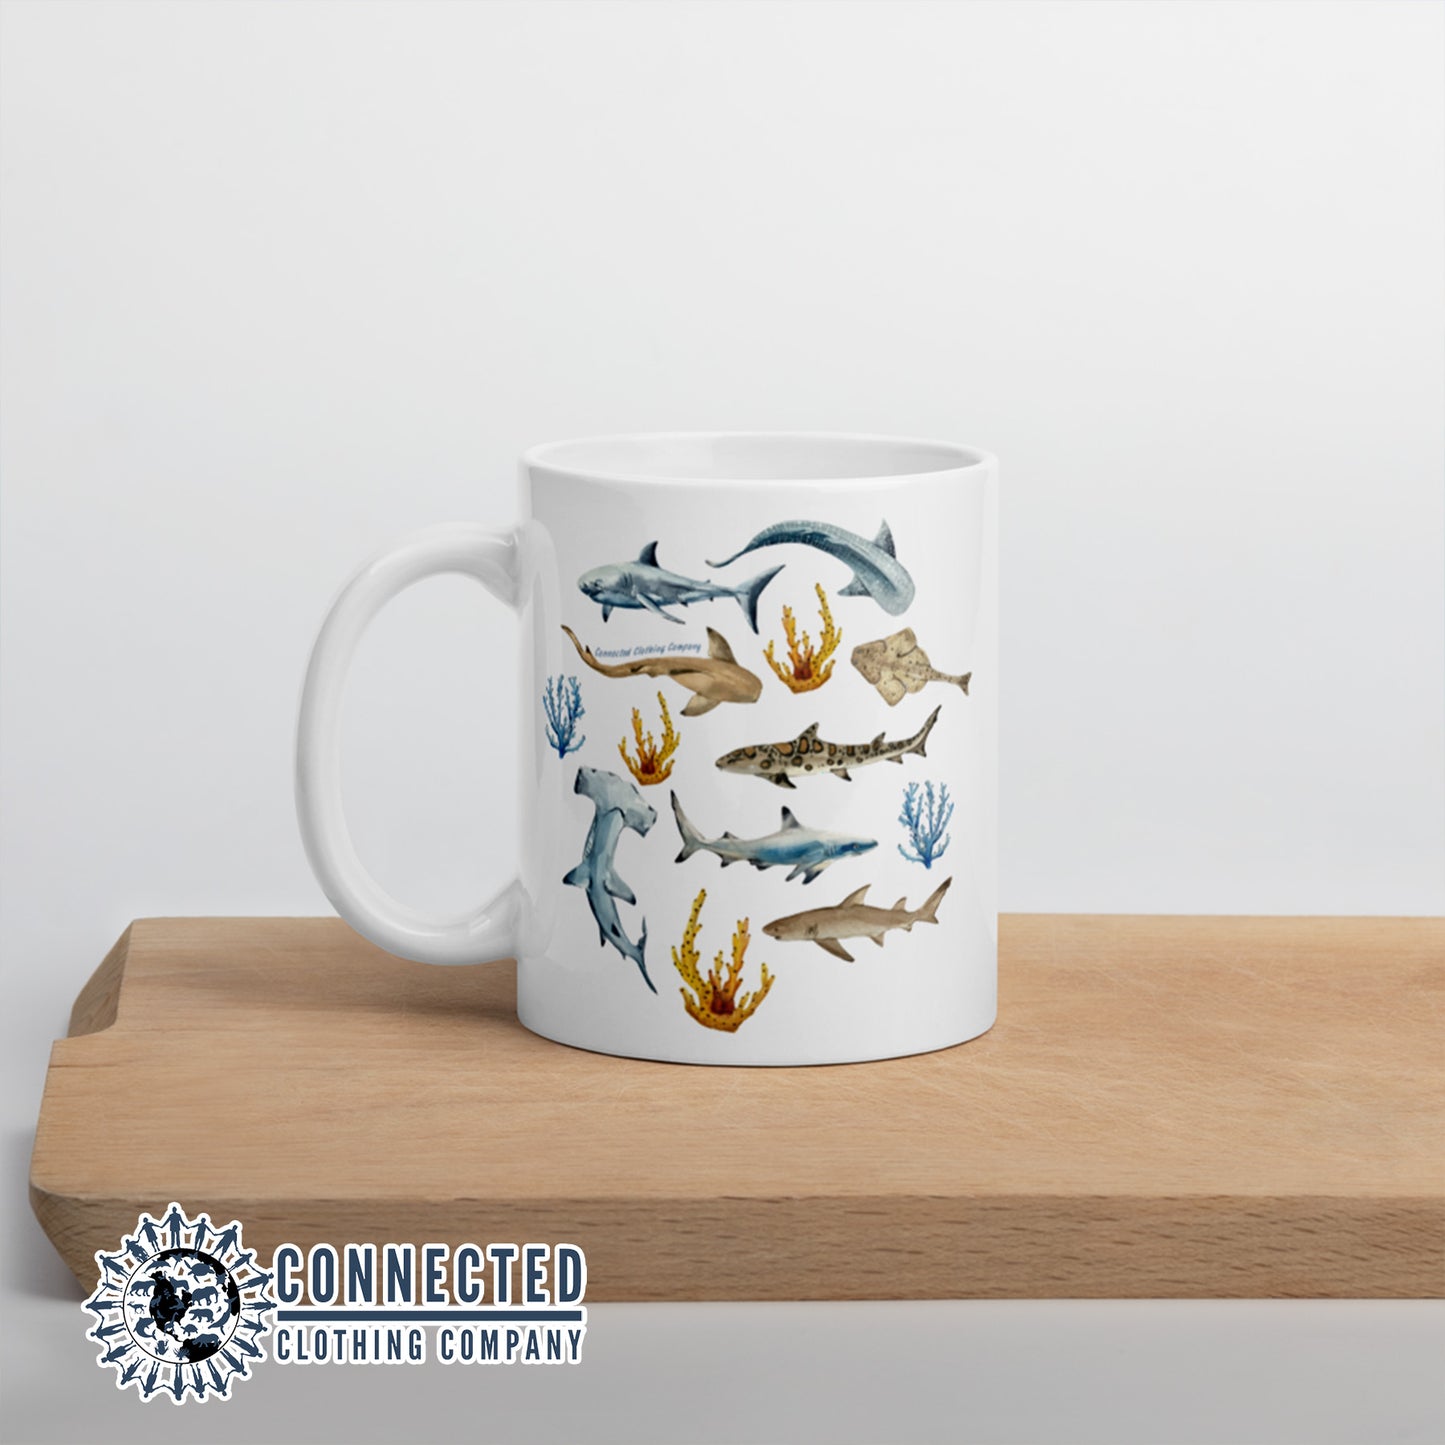 White Shark Ocean Watercolor Classic Mug - Connected Clothing Company - Ethically and Sustainably Made - 10% of profits donated to shark conservation and ocean conservation